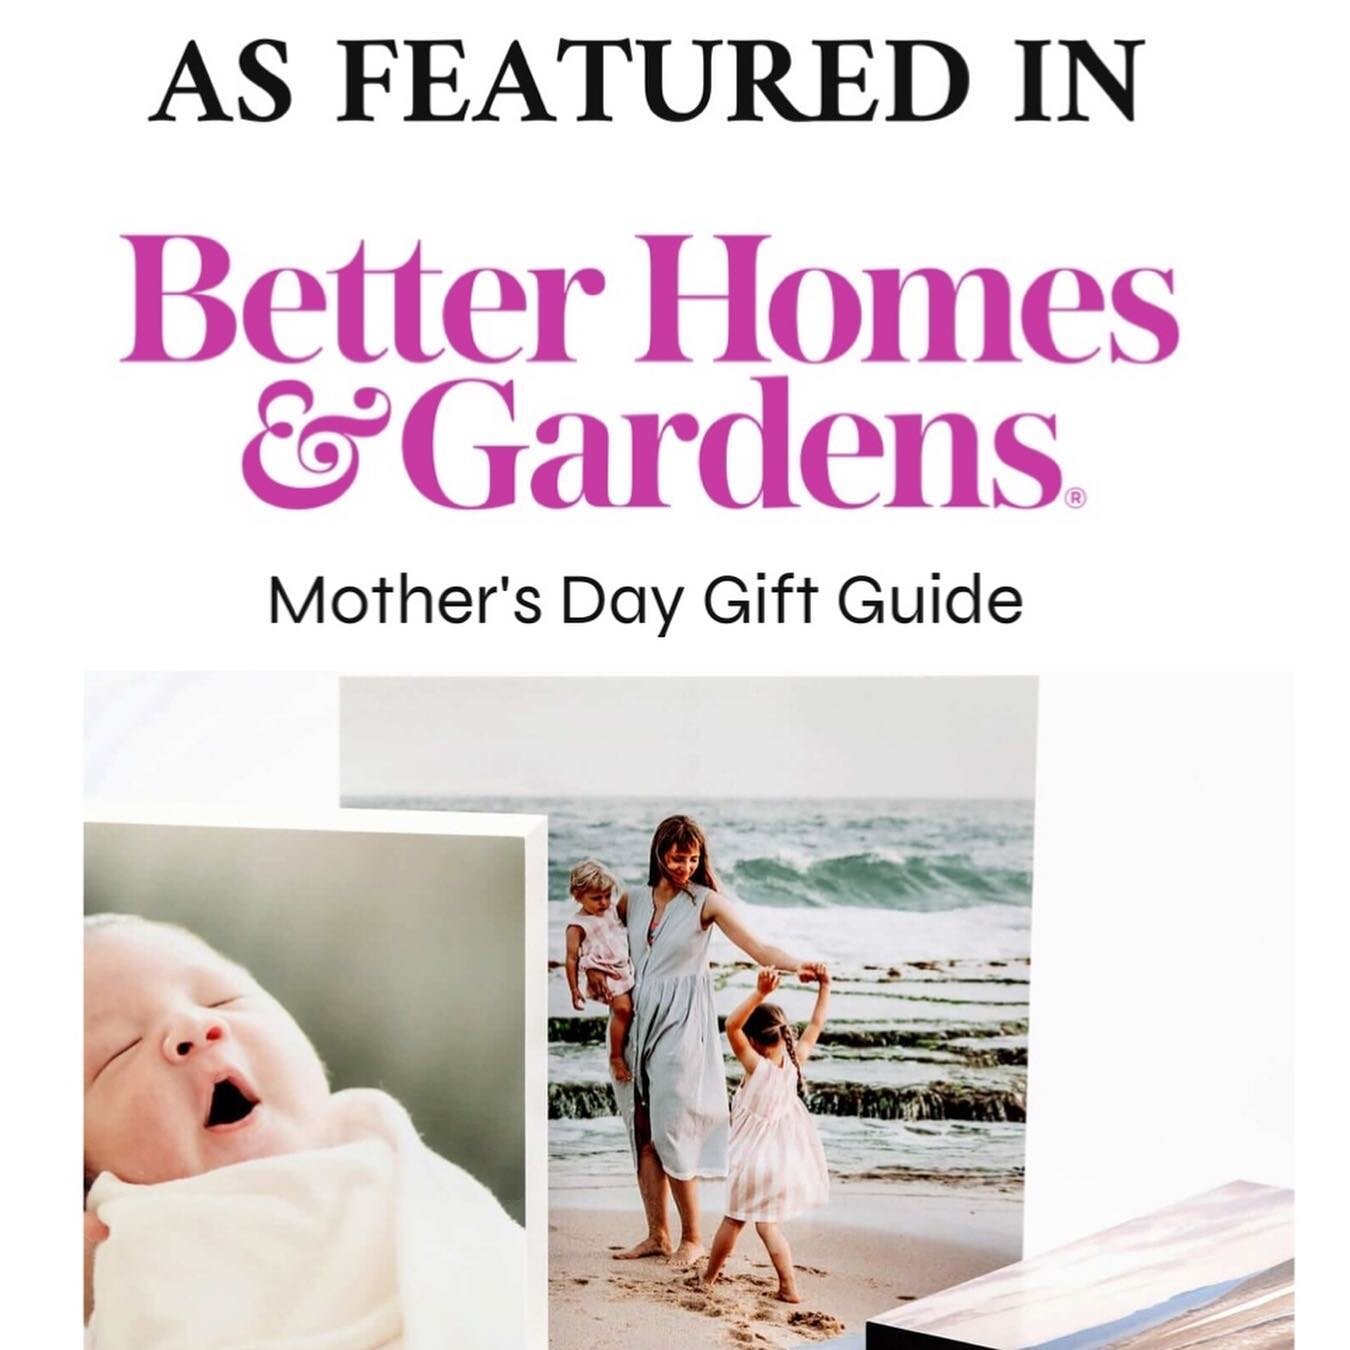 To all the mothers &amp; mother figures out there: You are the heart and soul of every beautiful moment captured. Your love, dedication, and unwavering support create the foundations of our memories. Happy Mother's Day!

Thank you @betterhomesandgard